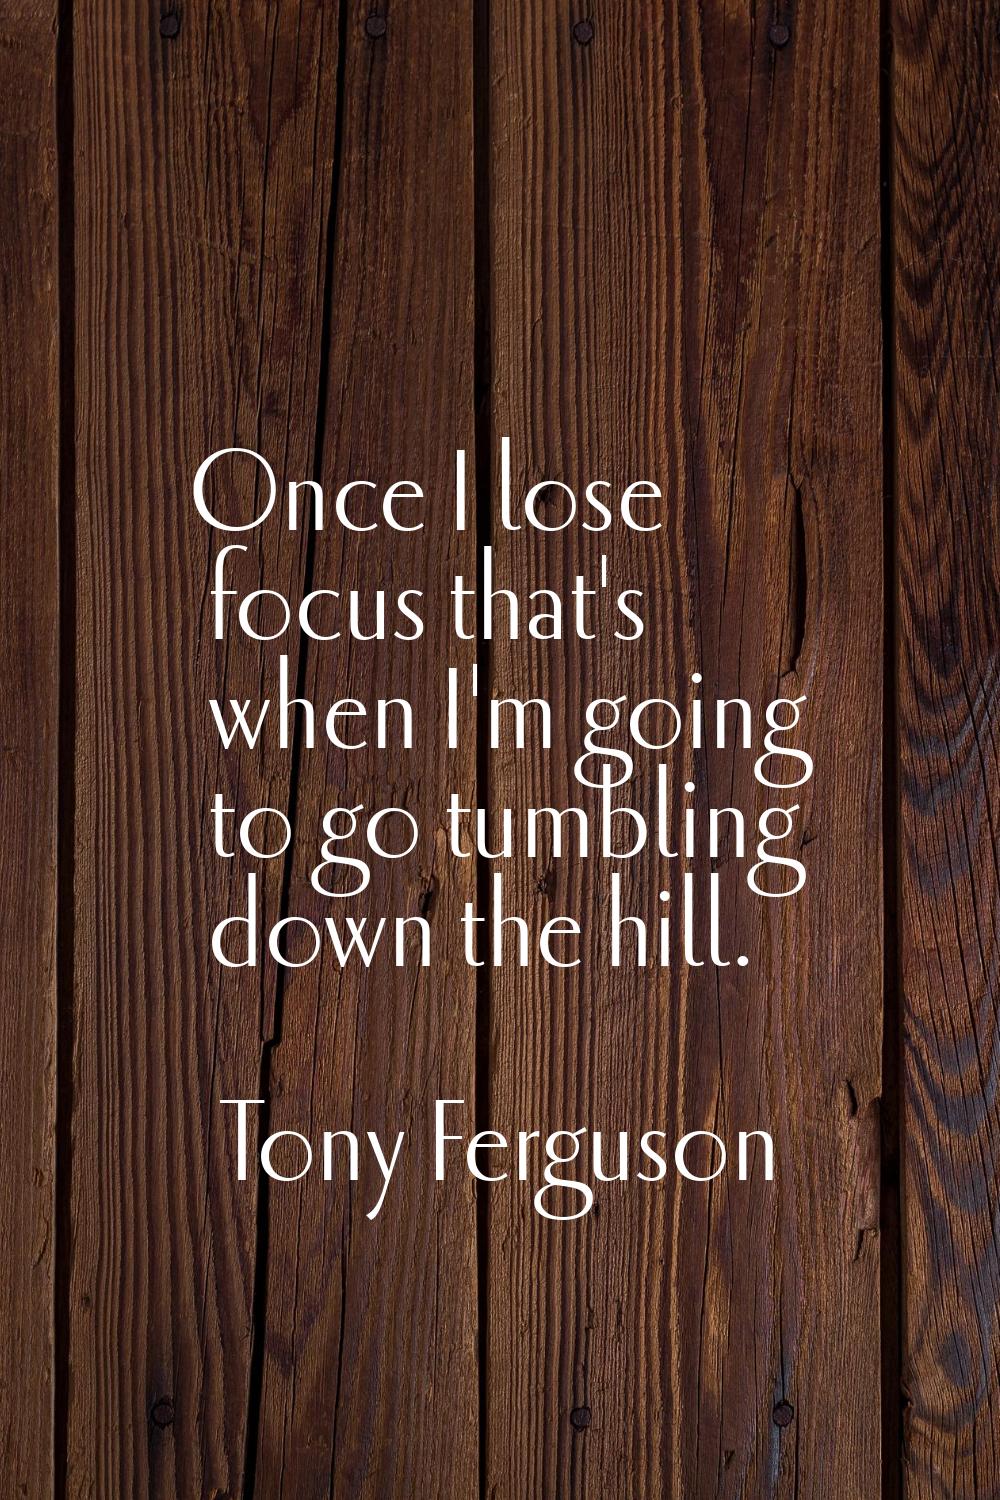 Once I lose focus that's when I'm going to go tumbling down the hill.